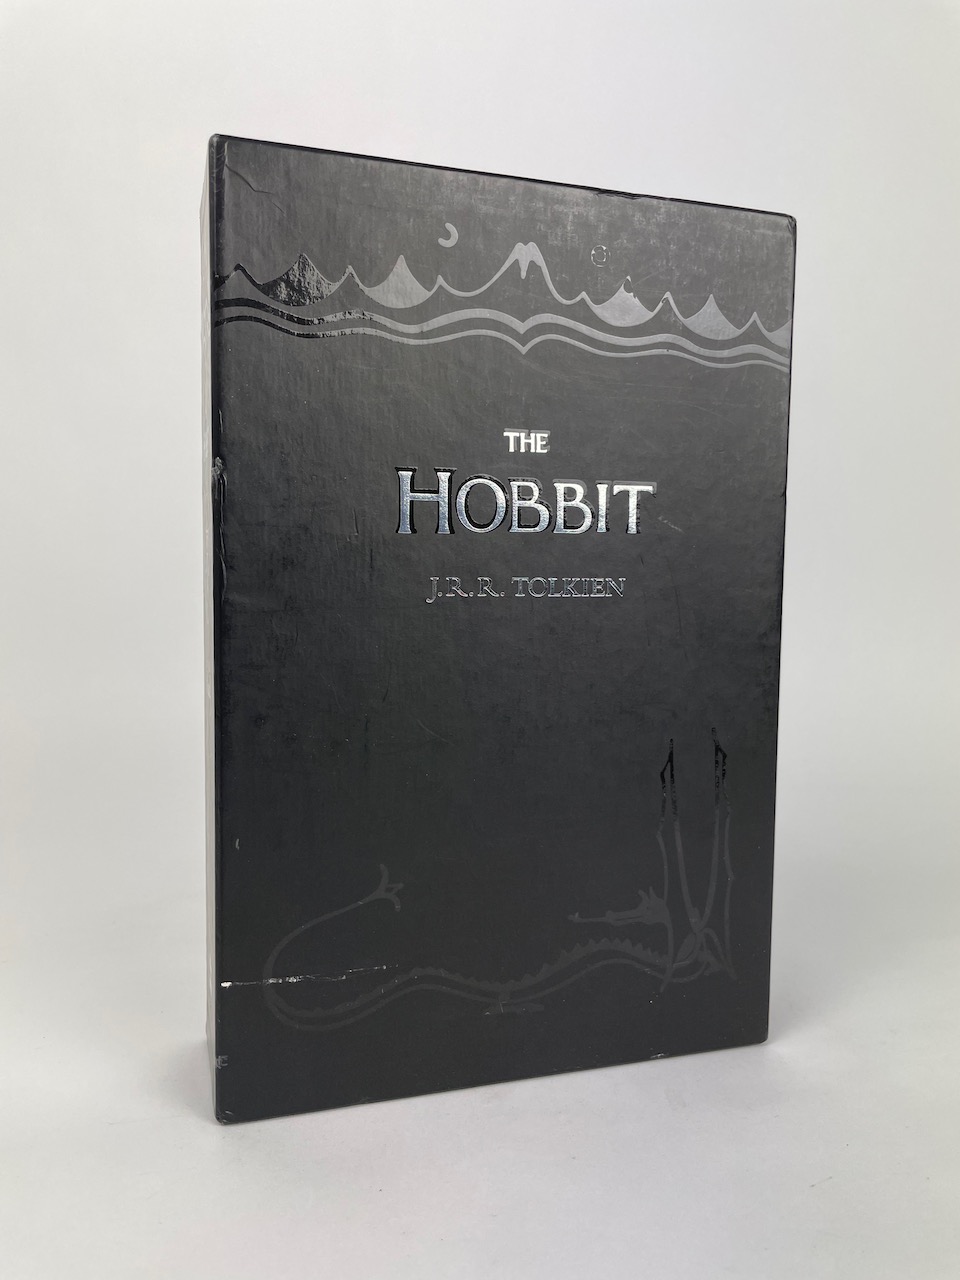 The Boxed set contains a copy of the Hobbit, as well as 8 postcards depicting the maps, color illustrations and the dustjacket from the book